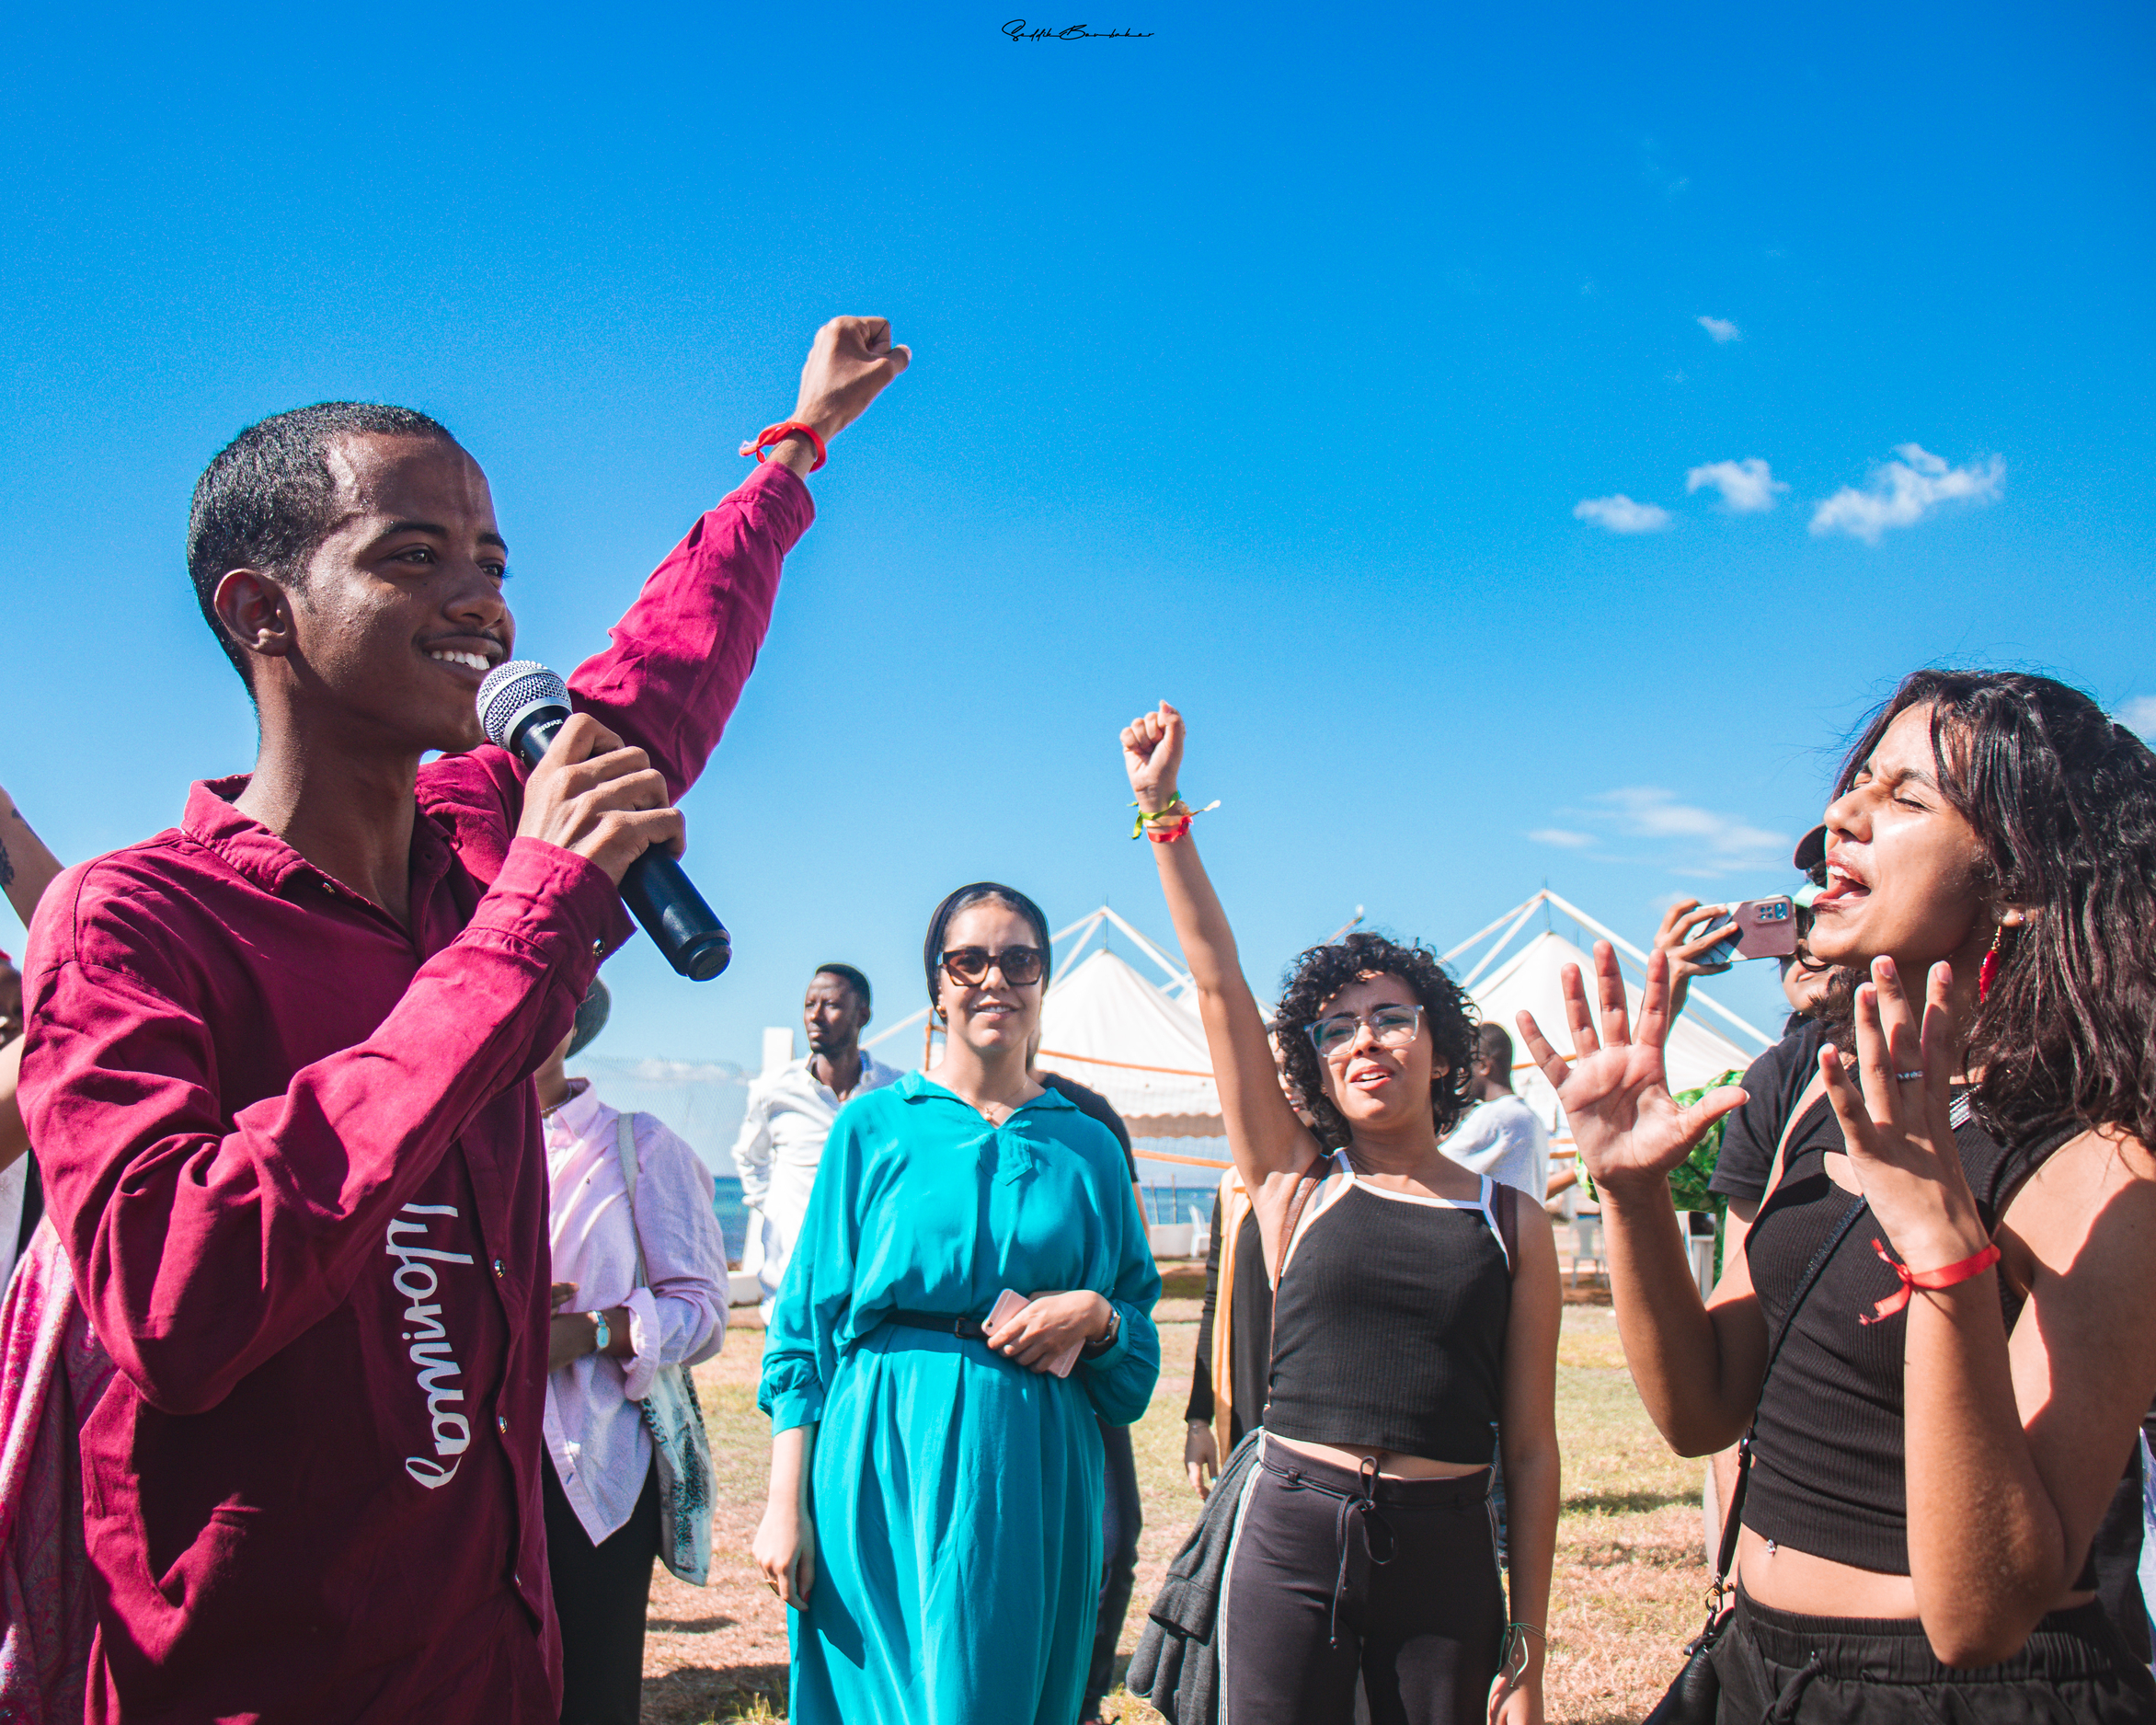 Against a blue sky a smiling dark-skinned young man holds his fist in the air and a microphone. Another young girl is central, also with her fist in the air, and another young woman holds both her hands up in front of her face, which has a scrunched expression as if she is shouting. There are more people of colour visible in the background, where there are white tents and a sliver of sea.